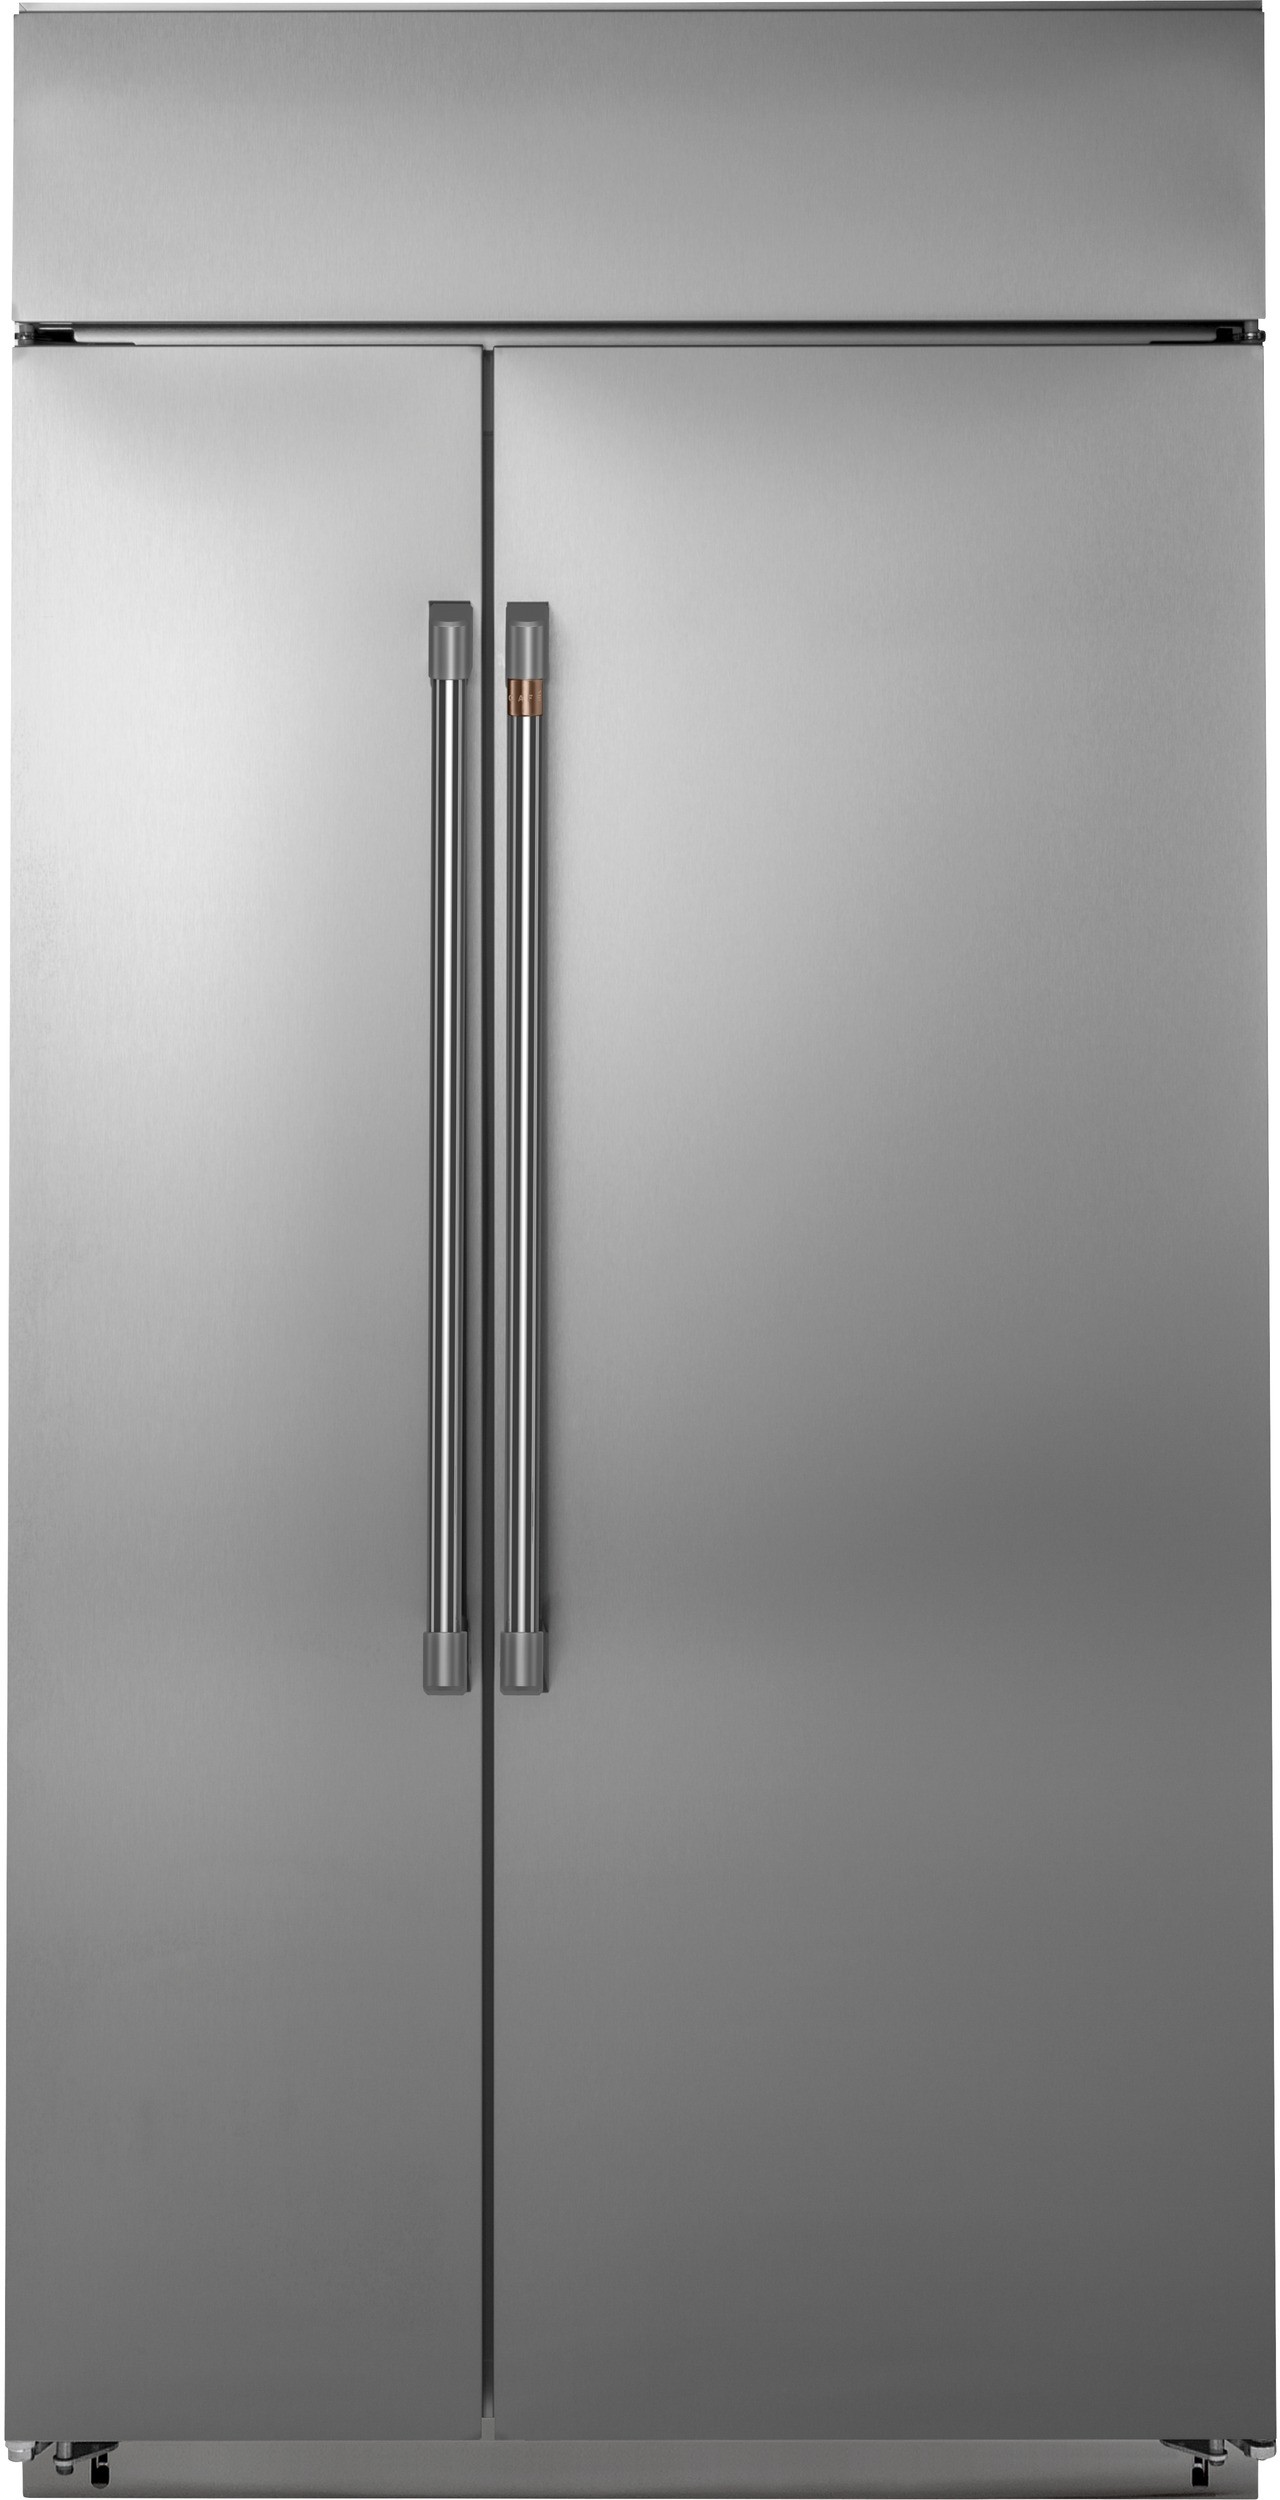 48 Inch 48"" Built In Counter Depth Side-by-Side Refrigerator - Cafe CSB48WP2NS1